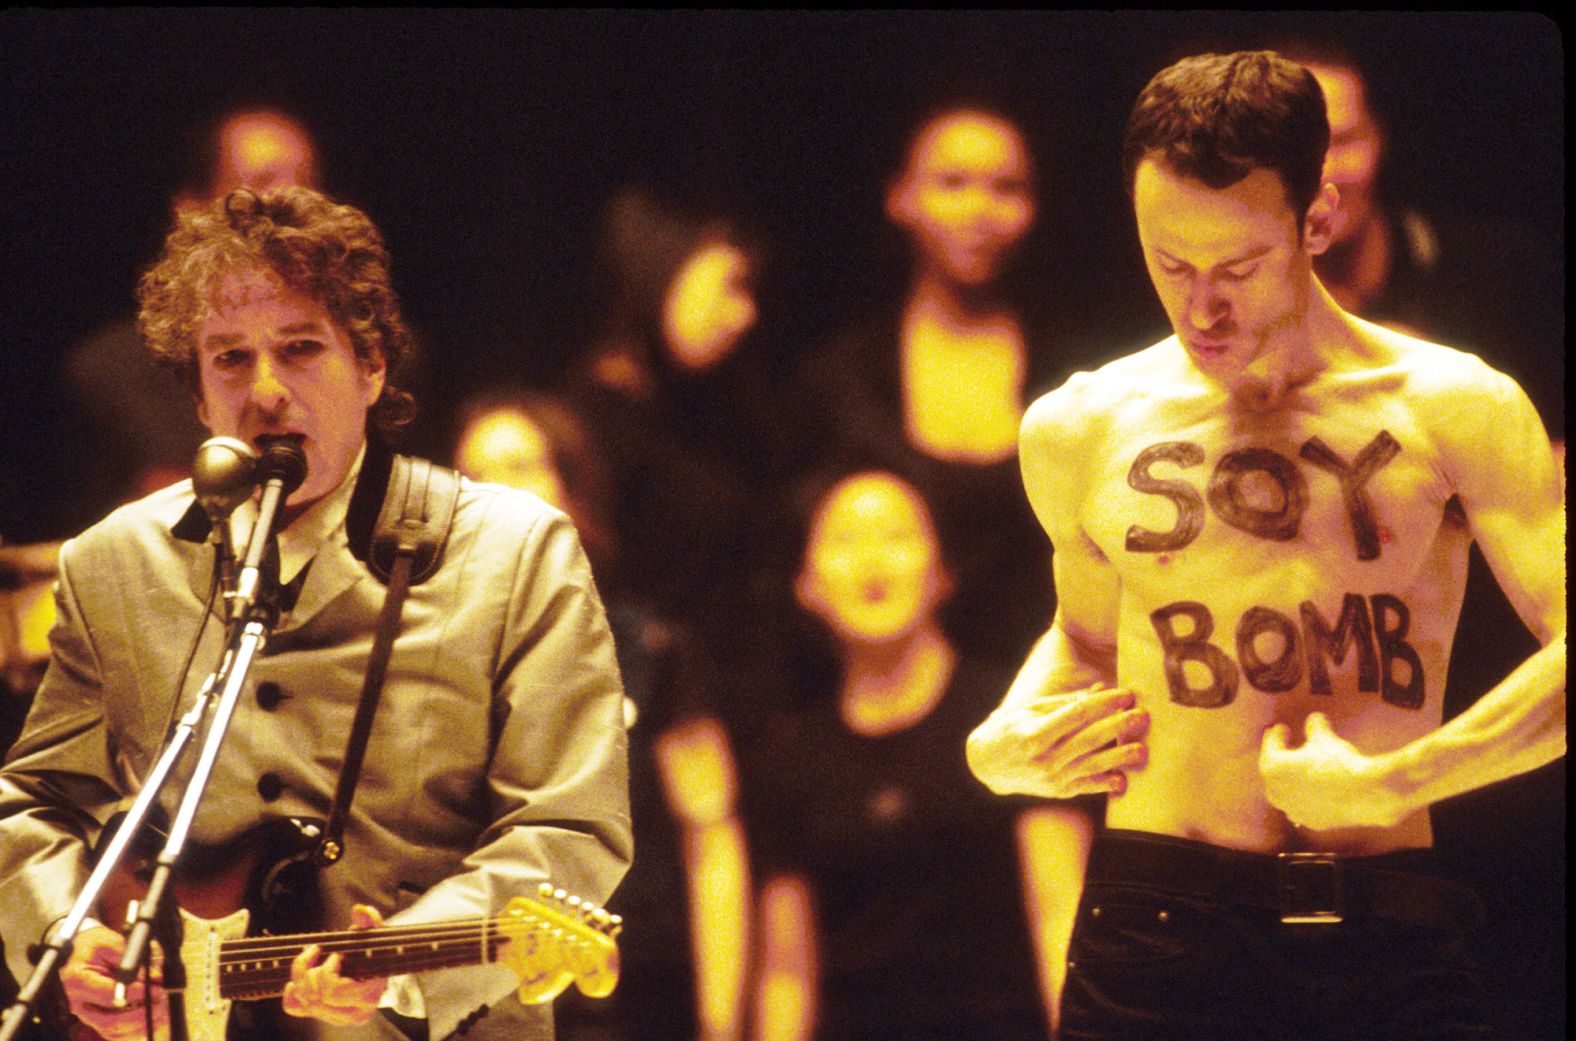 Dylan performs "Love Sick" alongside performance artist Michael Portney at the 1998 Grammy Awards. Portnoy had been hired as part of the background dancers for the performance, but his shirtless interruption was not planned and he was carted off stage.